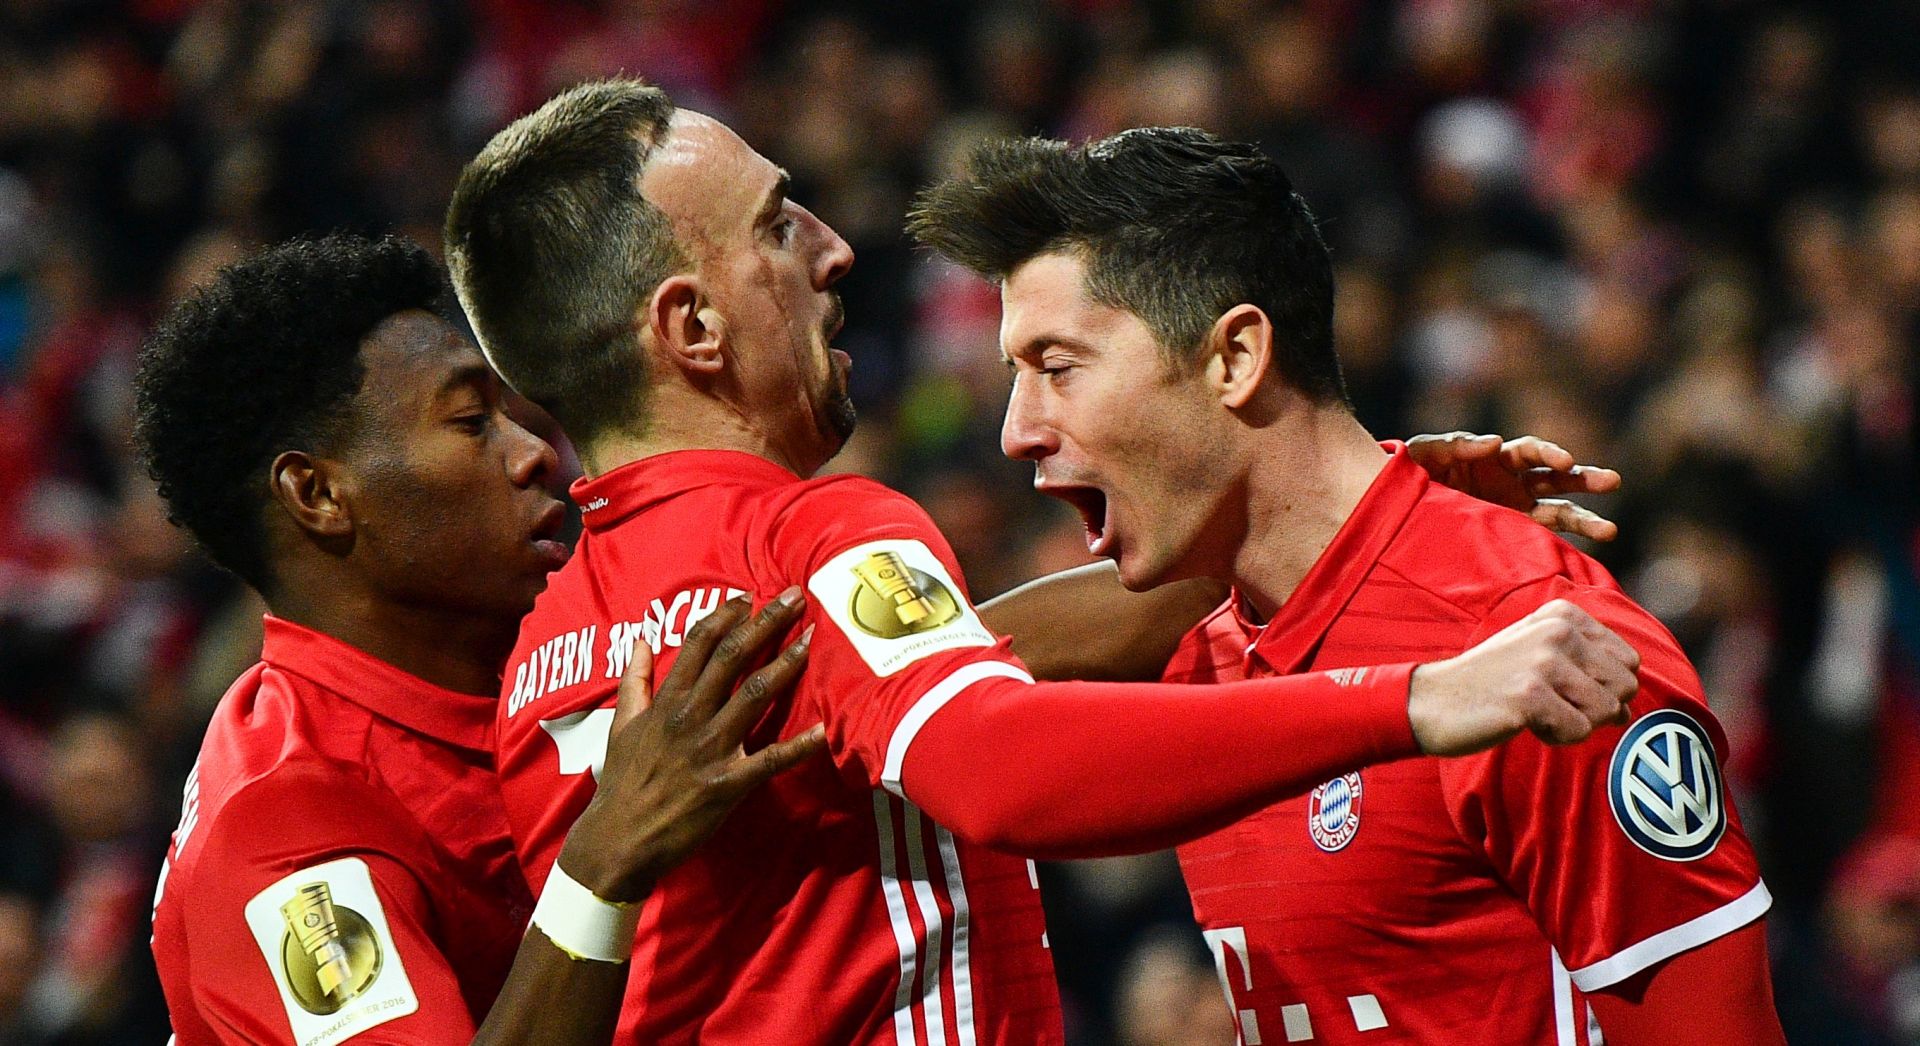 epa05823588 Bayern's Robert Lewandowski (R), Franck Ribery (C) and David Alaba celebrate the first goal during the German DFB Cup quarter final soccer match between FC Bayern Munich and FC Schalke 04 in Munich, Germany, 01 March 2017.

(ATTENTION: The DFB prohibits the utilisation and publication of sequential pictures on the internet and other online media during the match (including half-time). ATTENTION: BLOCKING PERIOD! The DFB permits the further utilisation and publication of the pictures for mobile services (especially MMS) and for DVB-H and DMB only after the end of the match.)  EPA/CHRISTIAN BRUNA